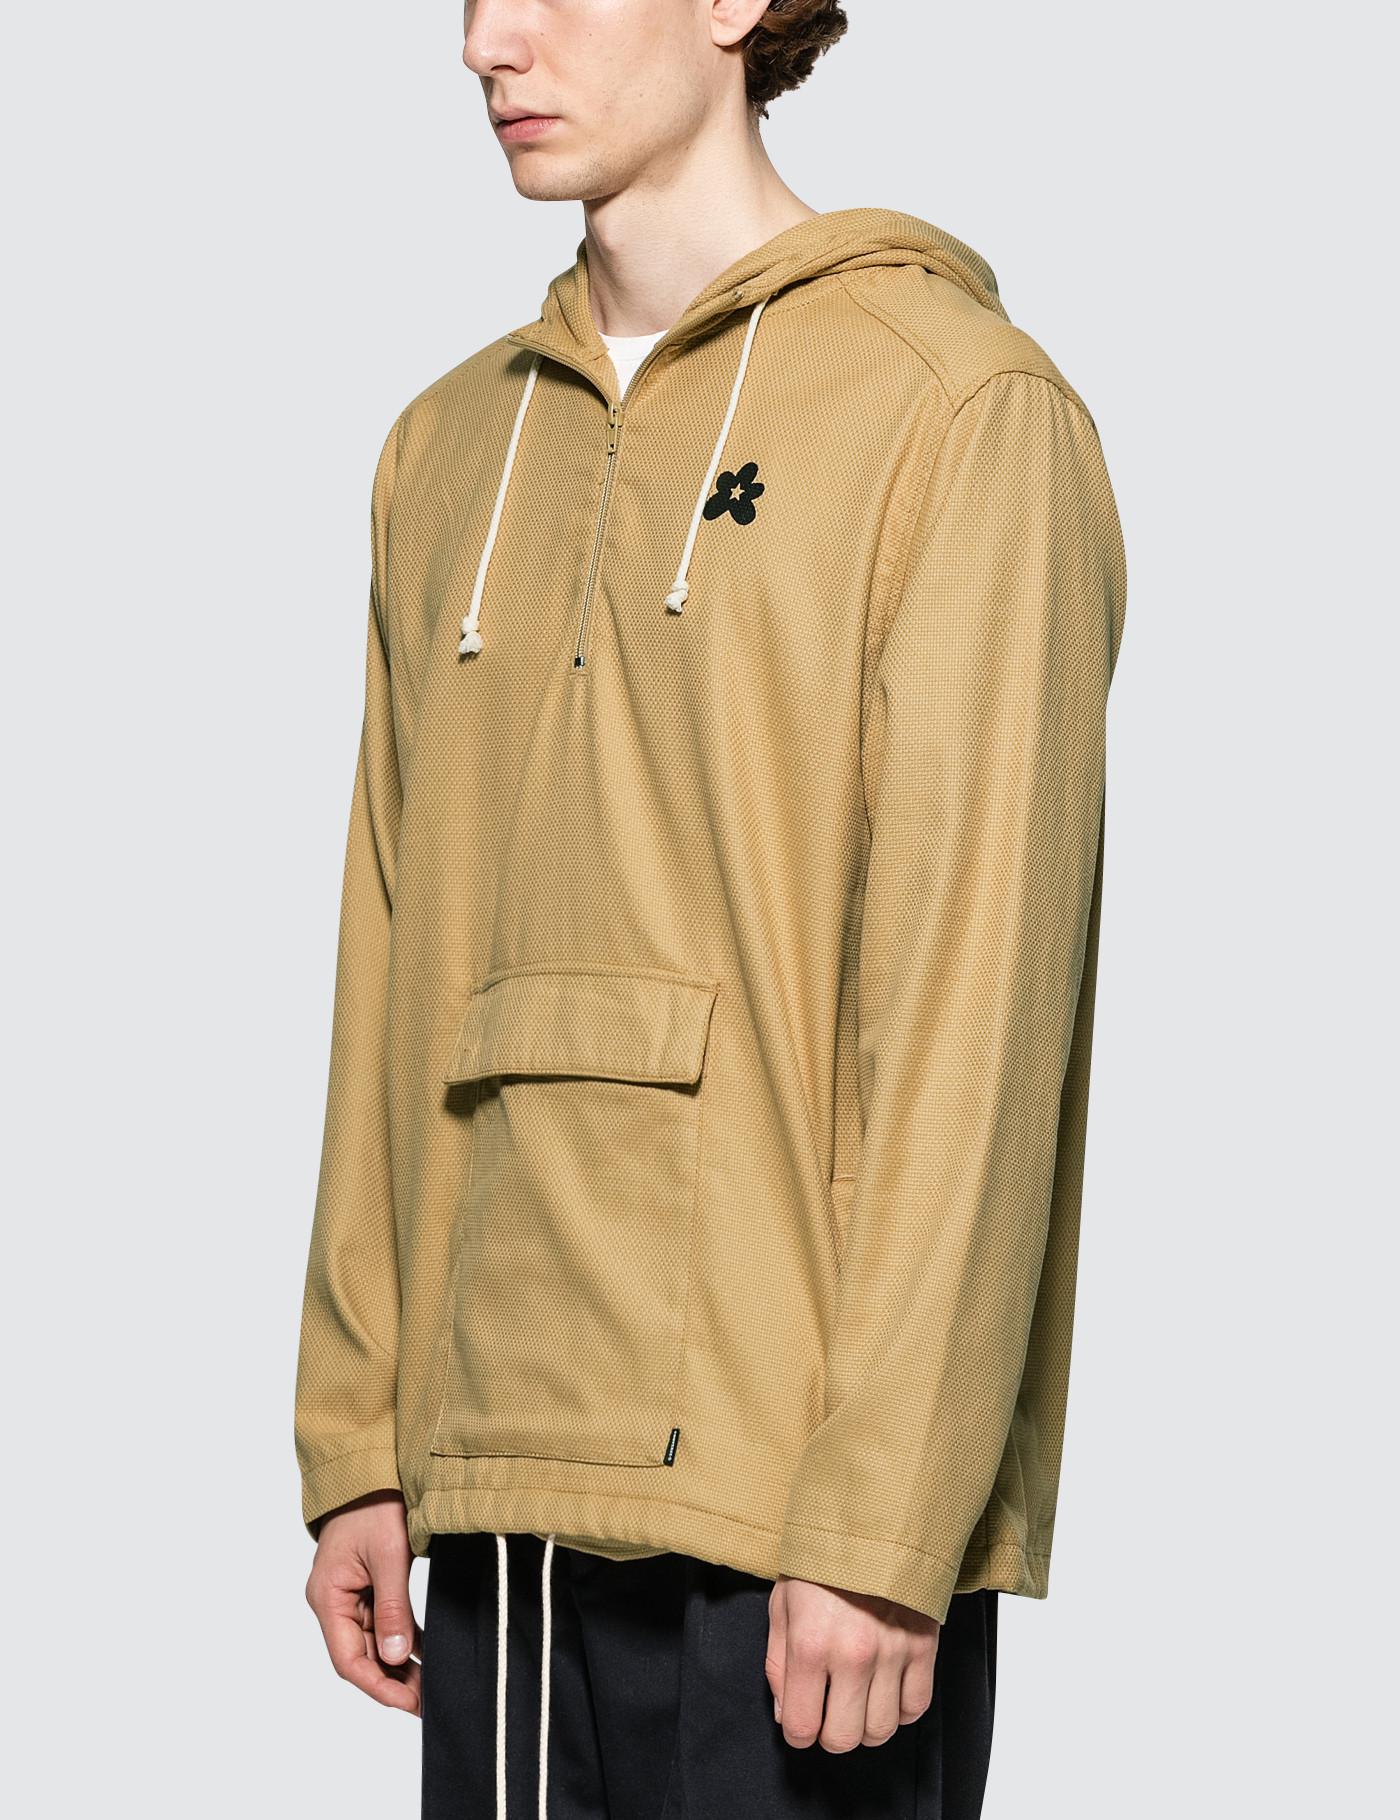 Converse Synthetic X Golf Le Fleur Anorak Jacket Curry in Beige (Natural)  for Men - Lyst